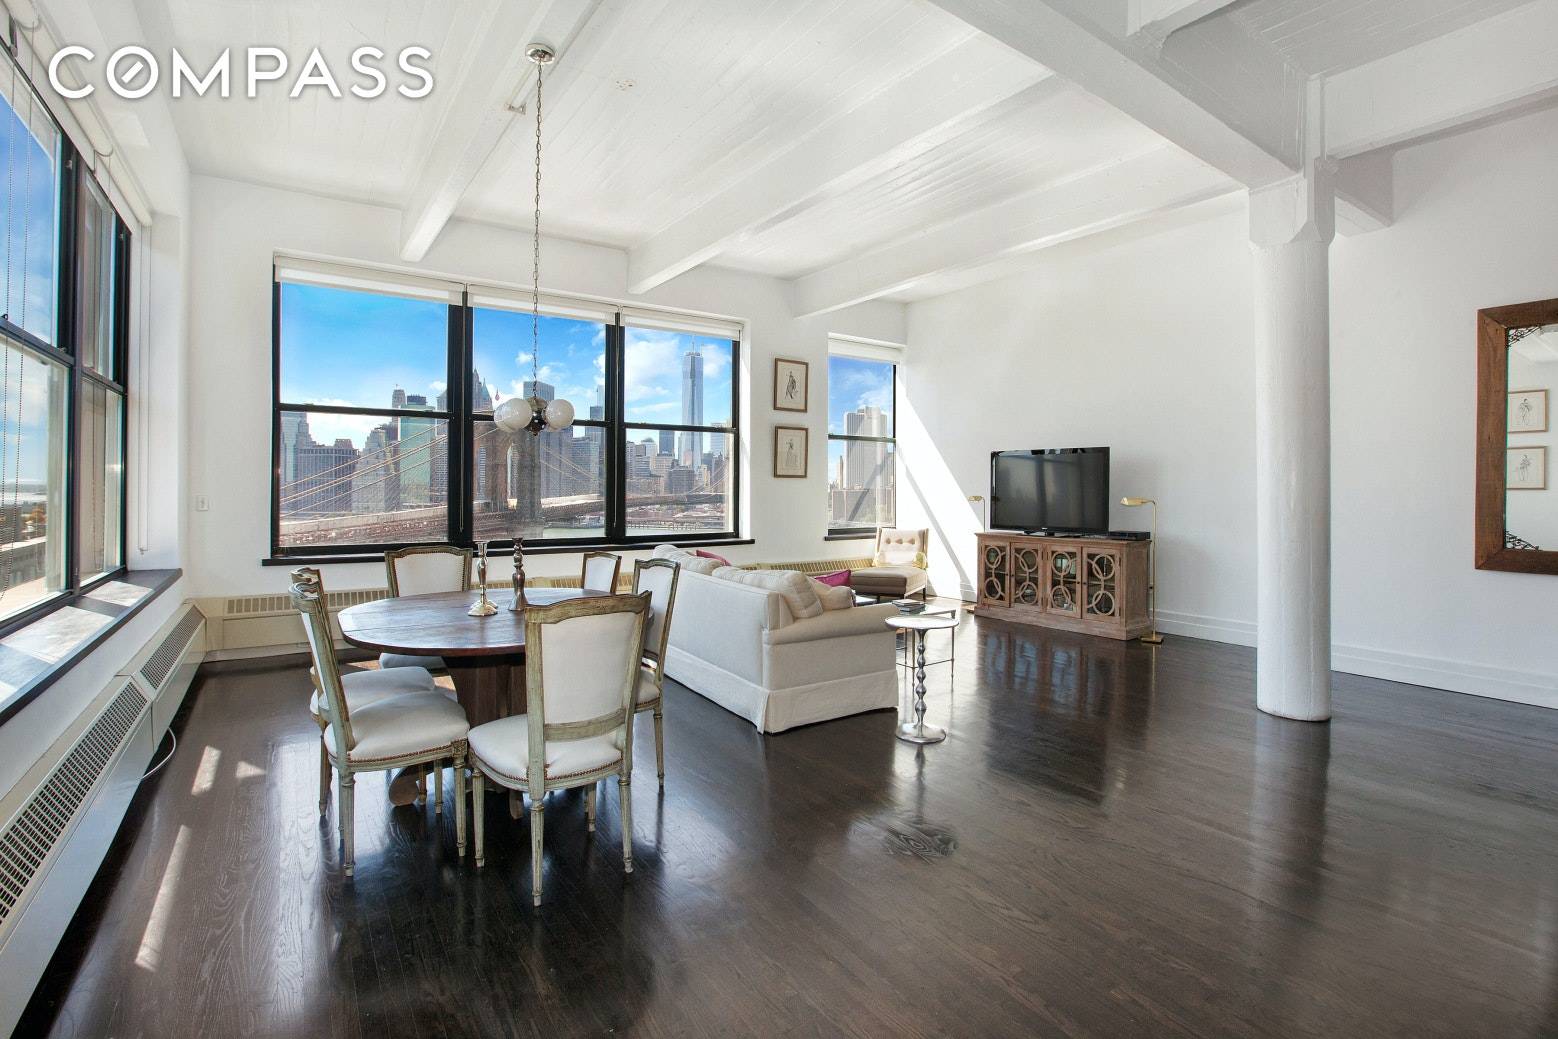 This beautiful open and airy space has unforgettable views of manhattan from the iconic Clocktower Condominium in DUMBO.